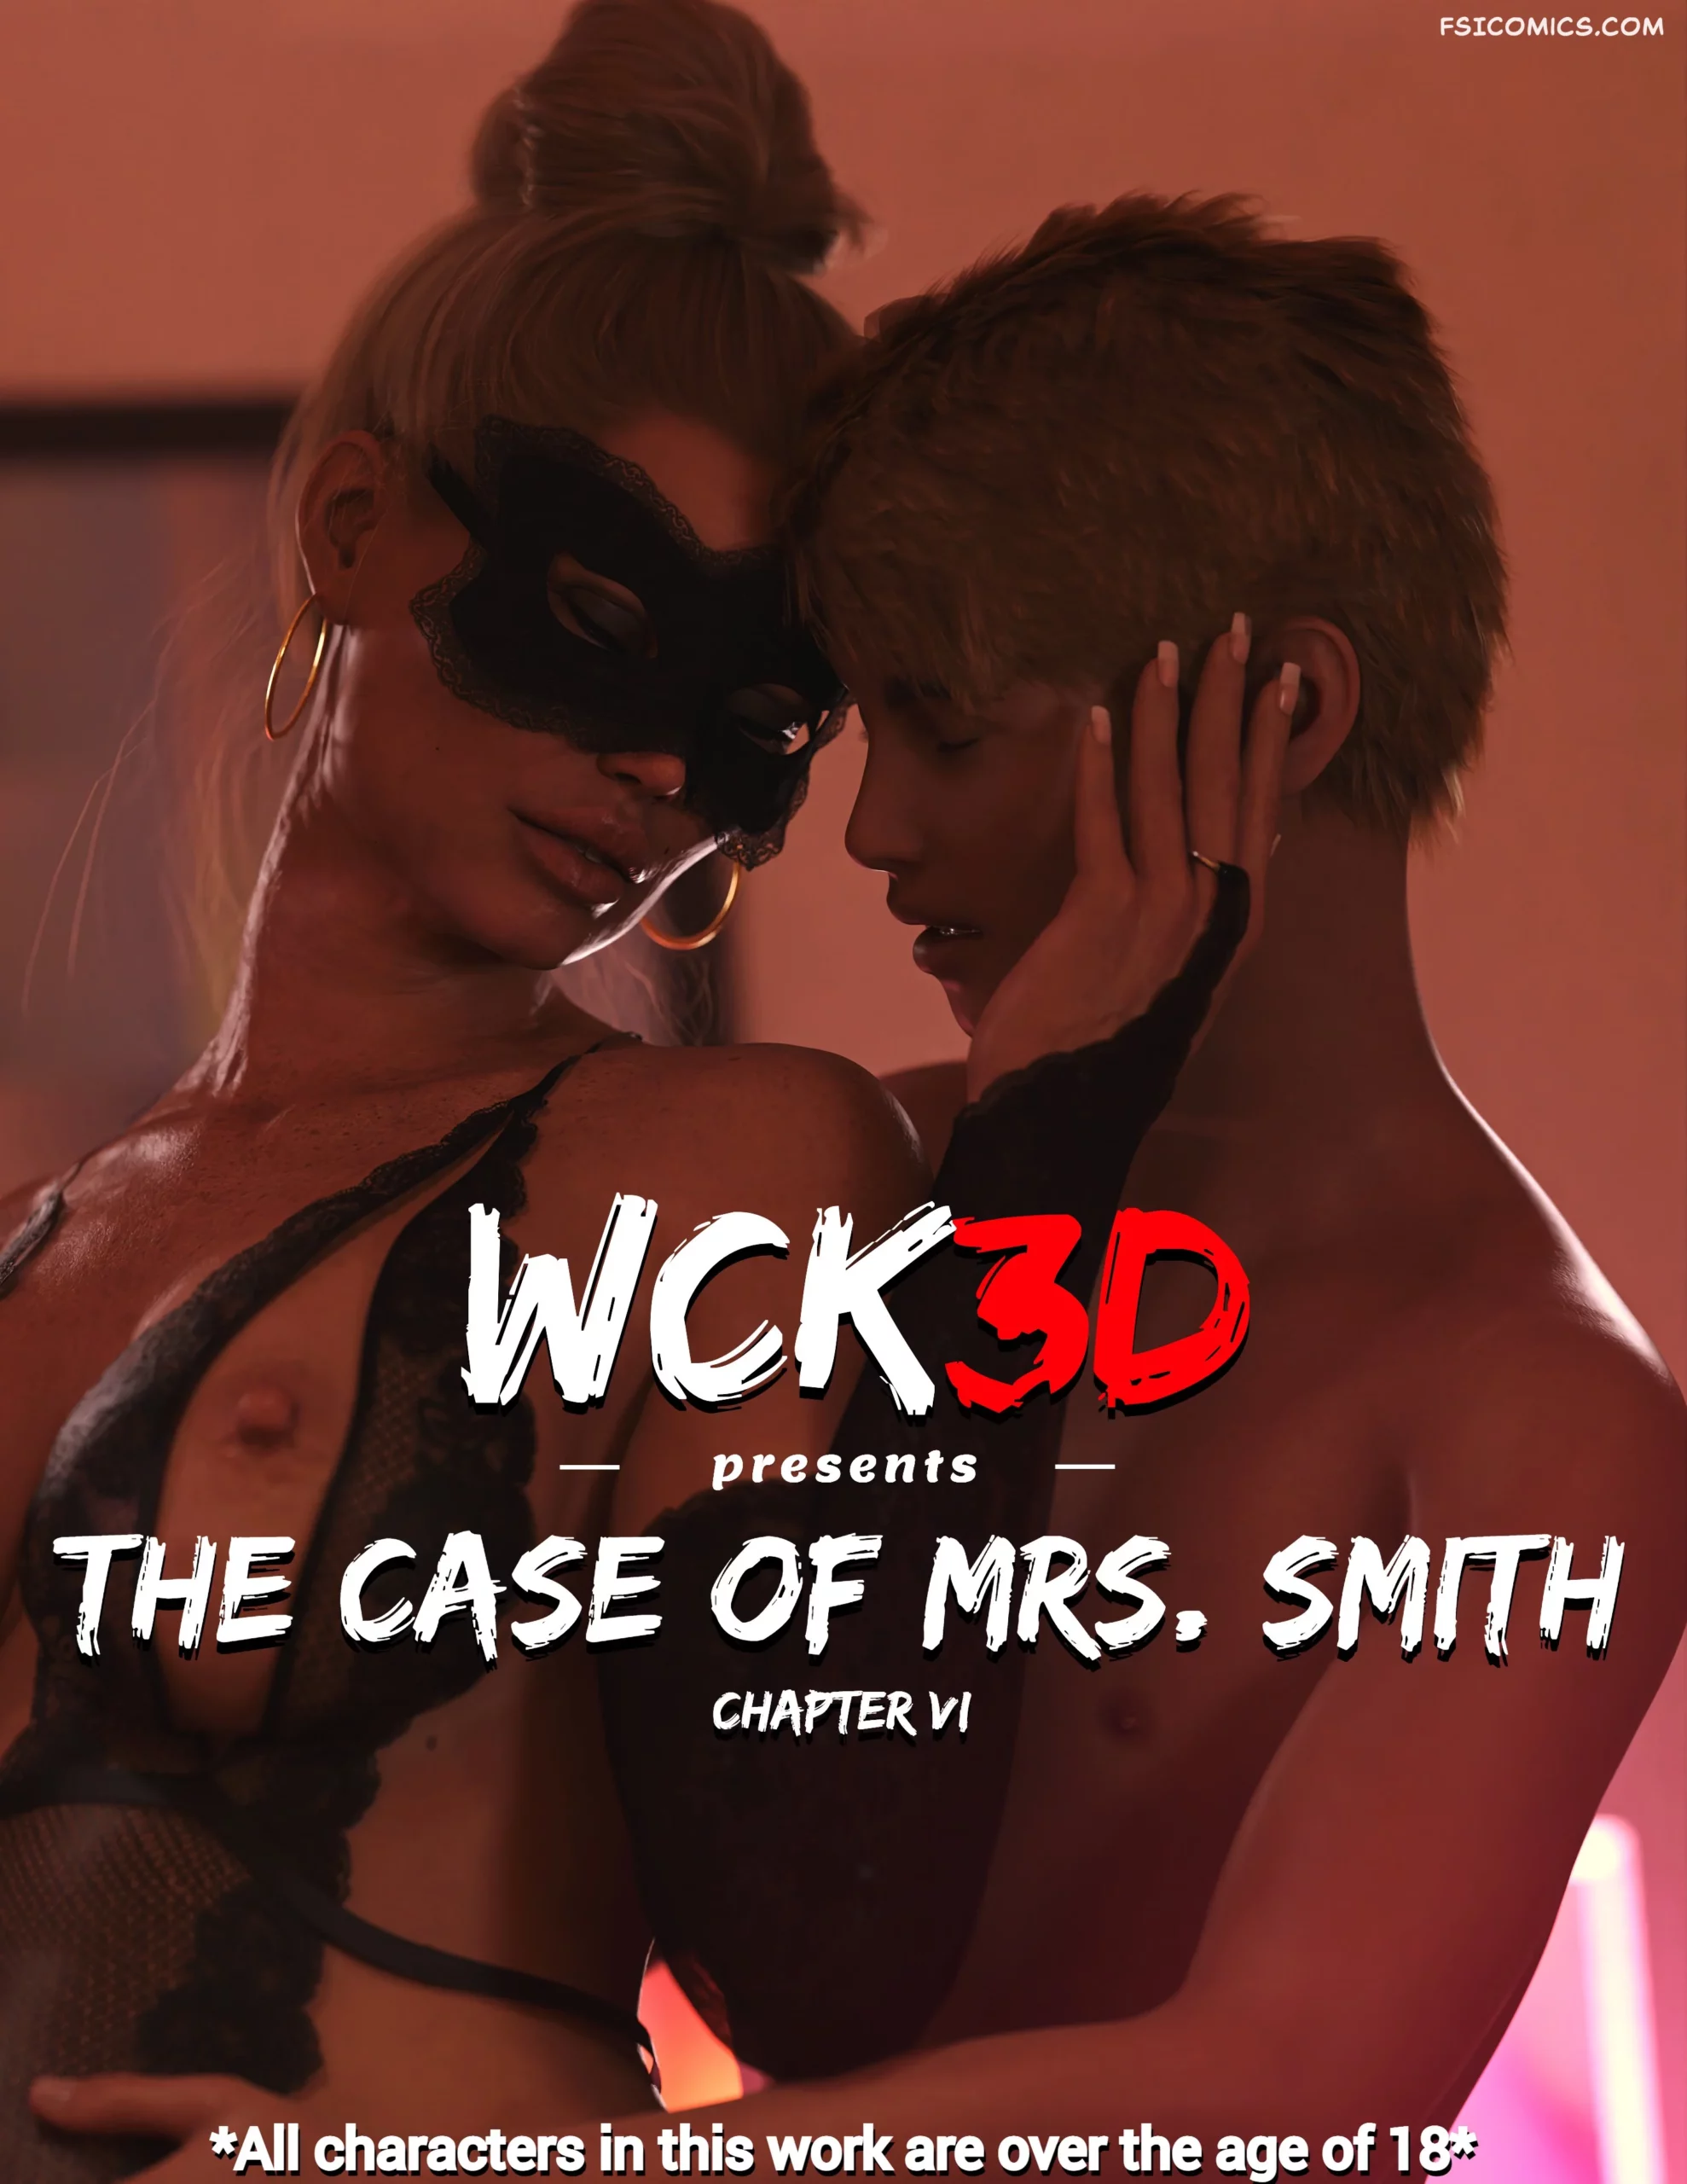 The Case Of Mrs Smith Chapter 6 – WCK3D - 7 - FSIComics